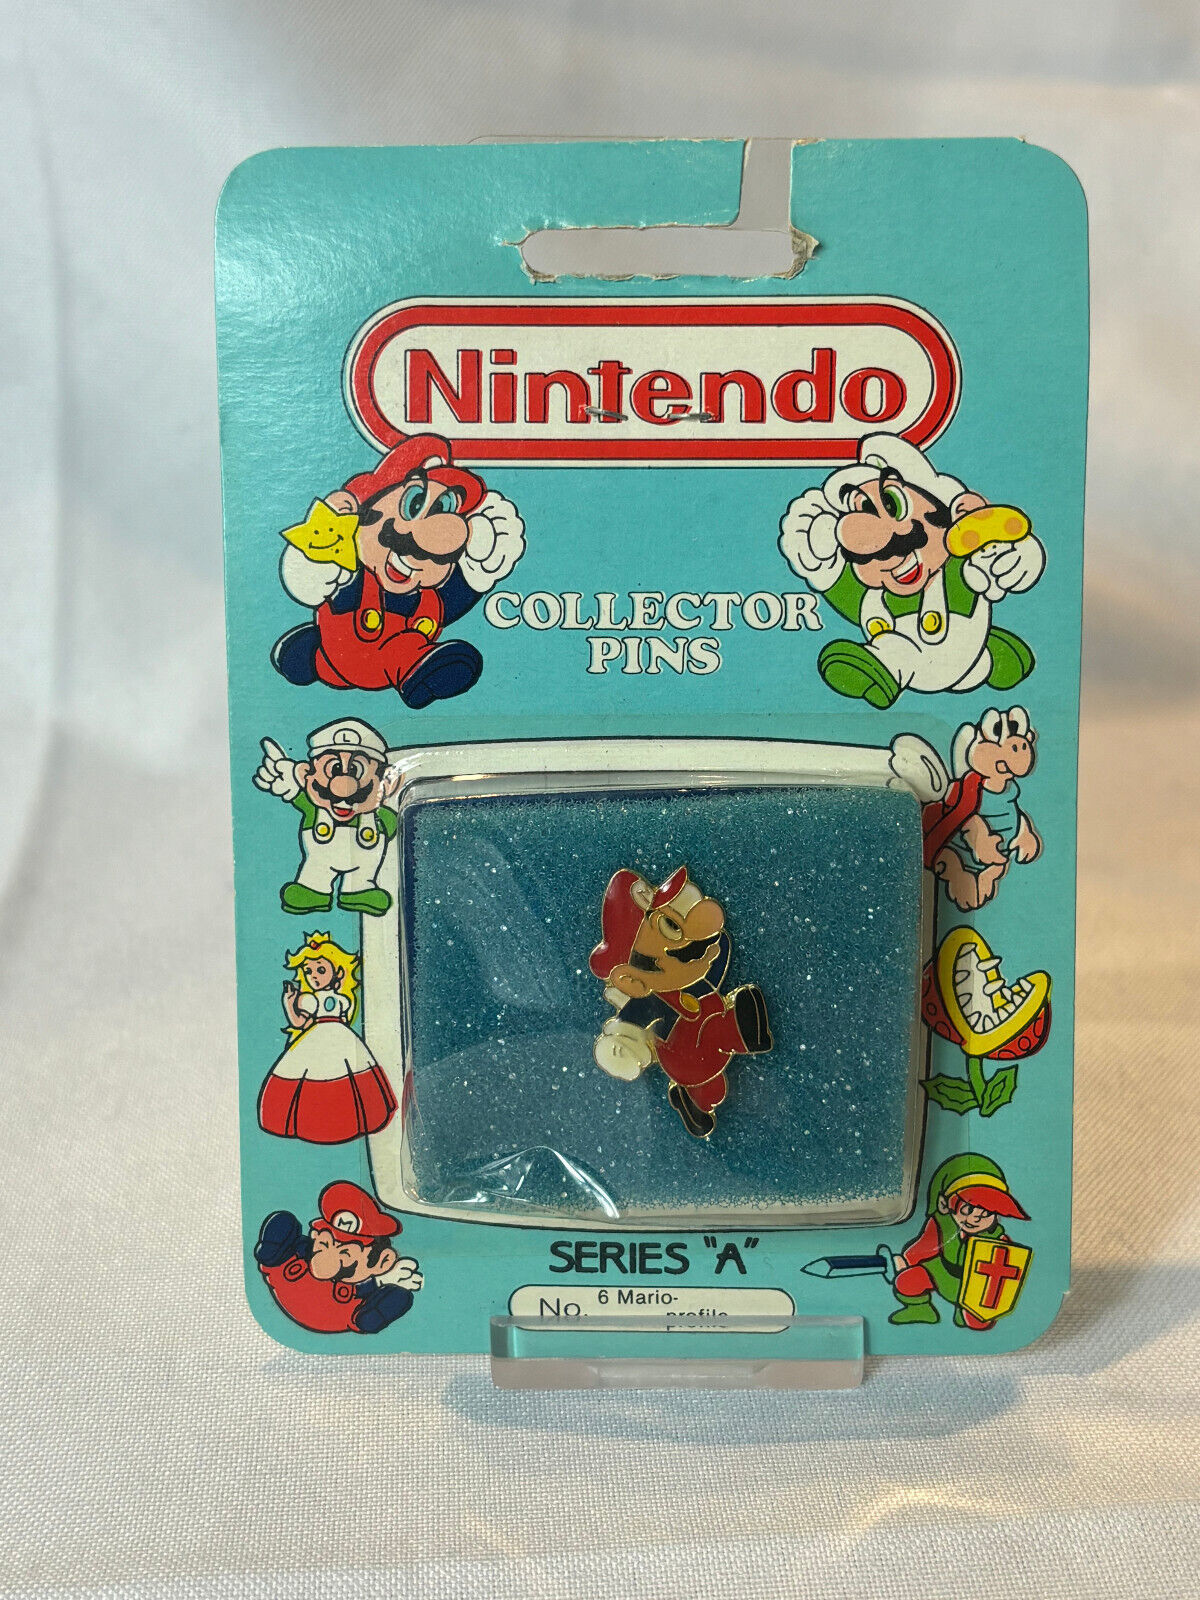 1989 Nintendo Collector Pin Series "A" No 6 MARIO PROFILE Sealed Blister Pack - $39.55